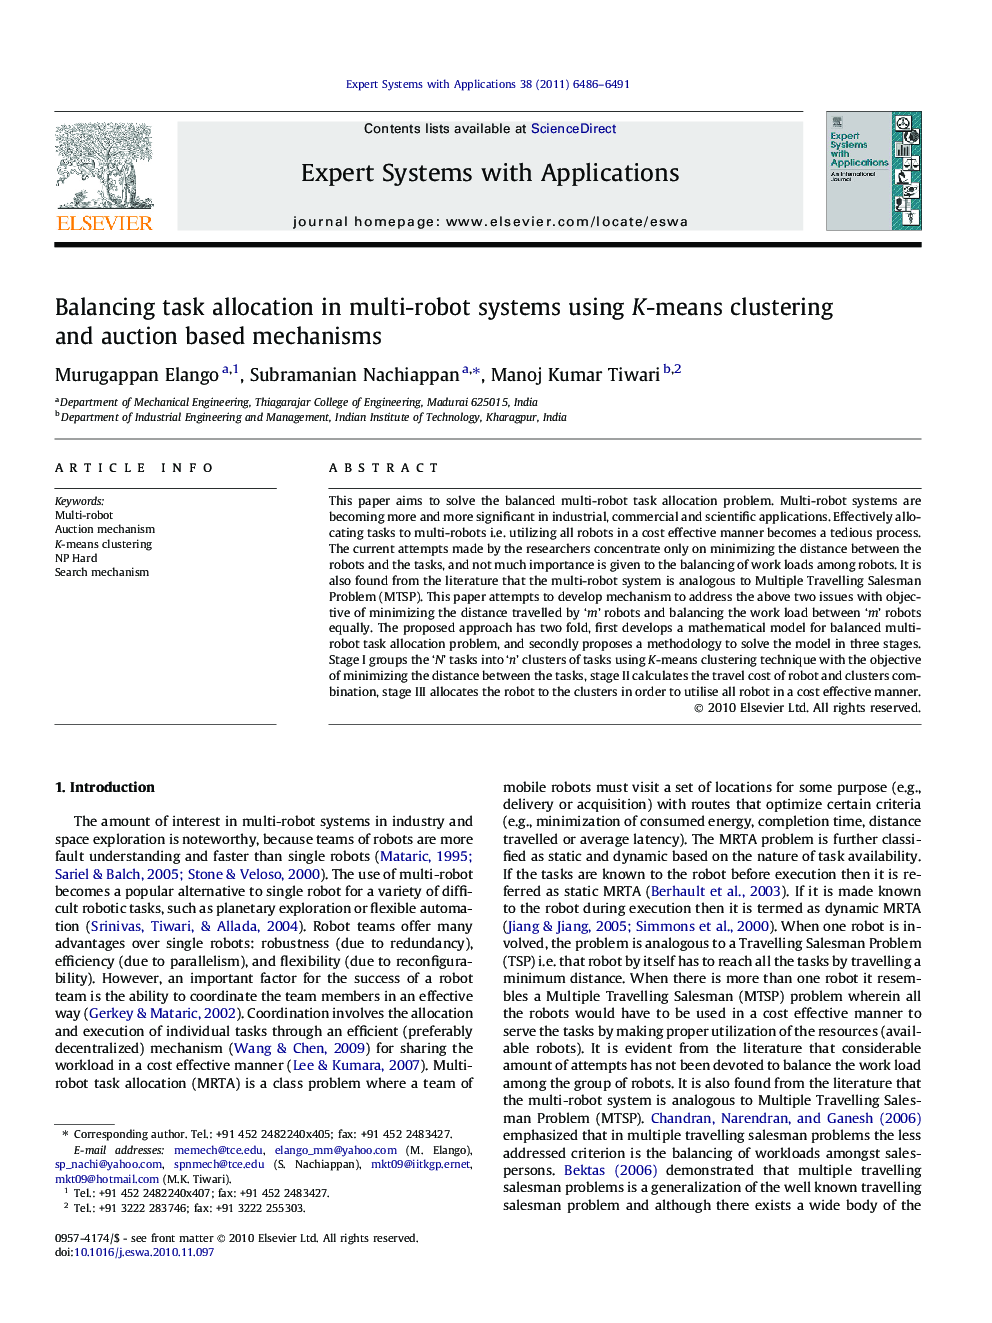 Balancing task allocation in multi-robot systems using K-means clustering and auction based mechanisms